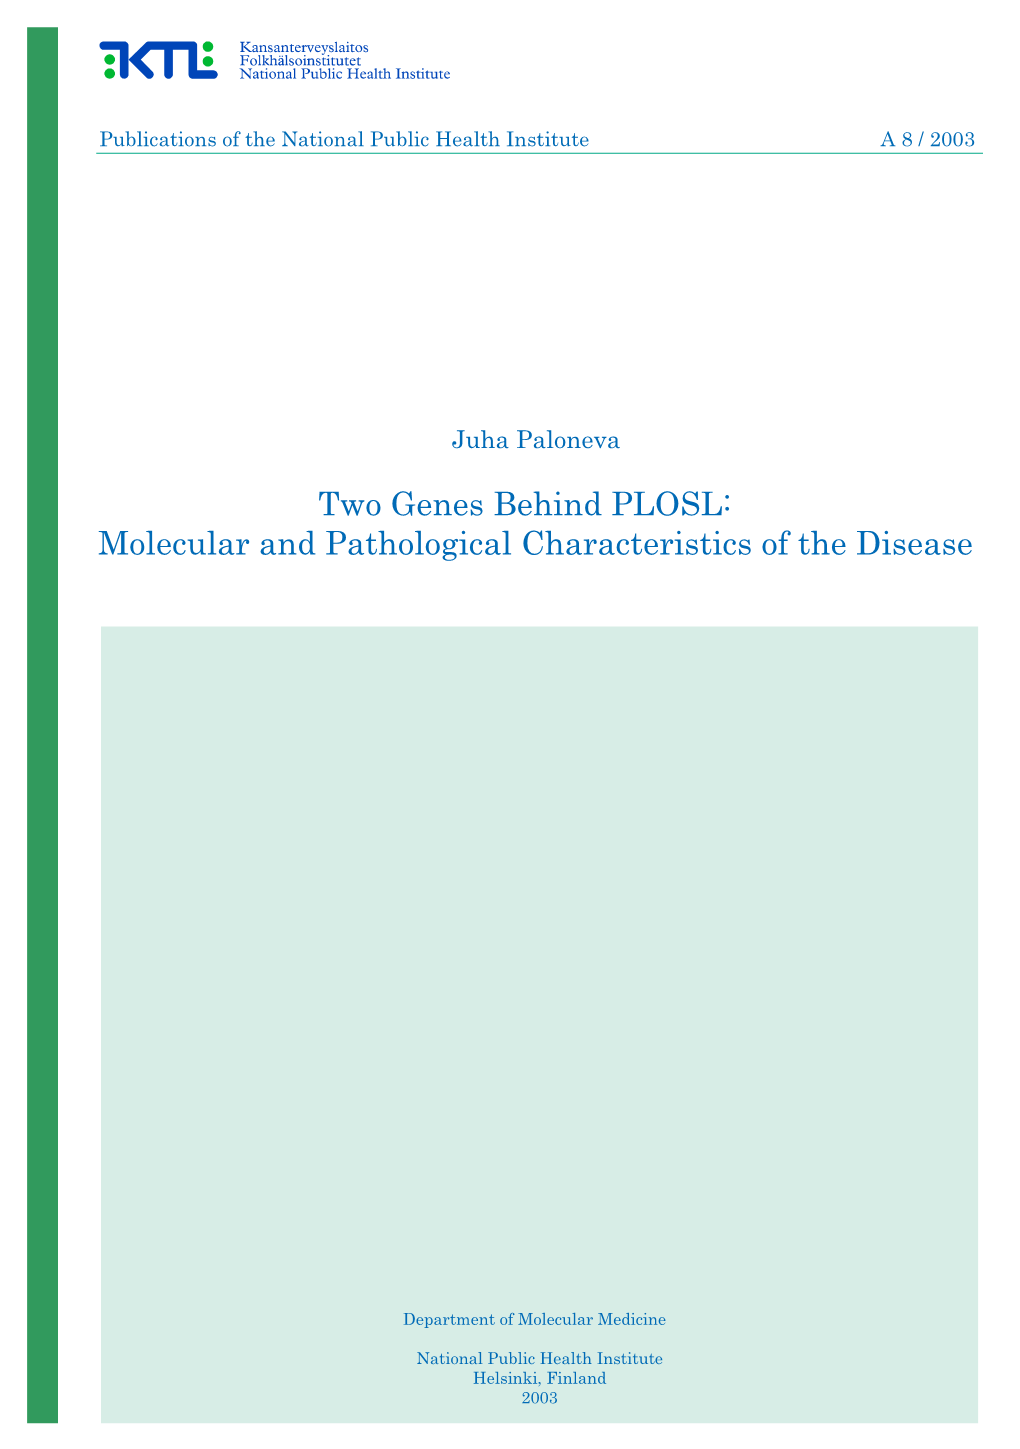 Two Genes Behind PLOSL: Molecular and Pathological Characteristics of the Disease